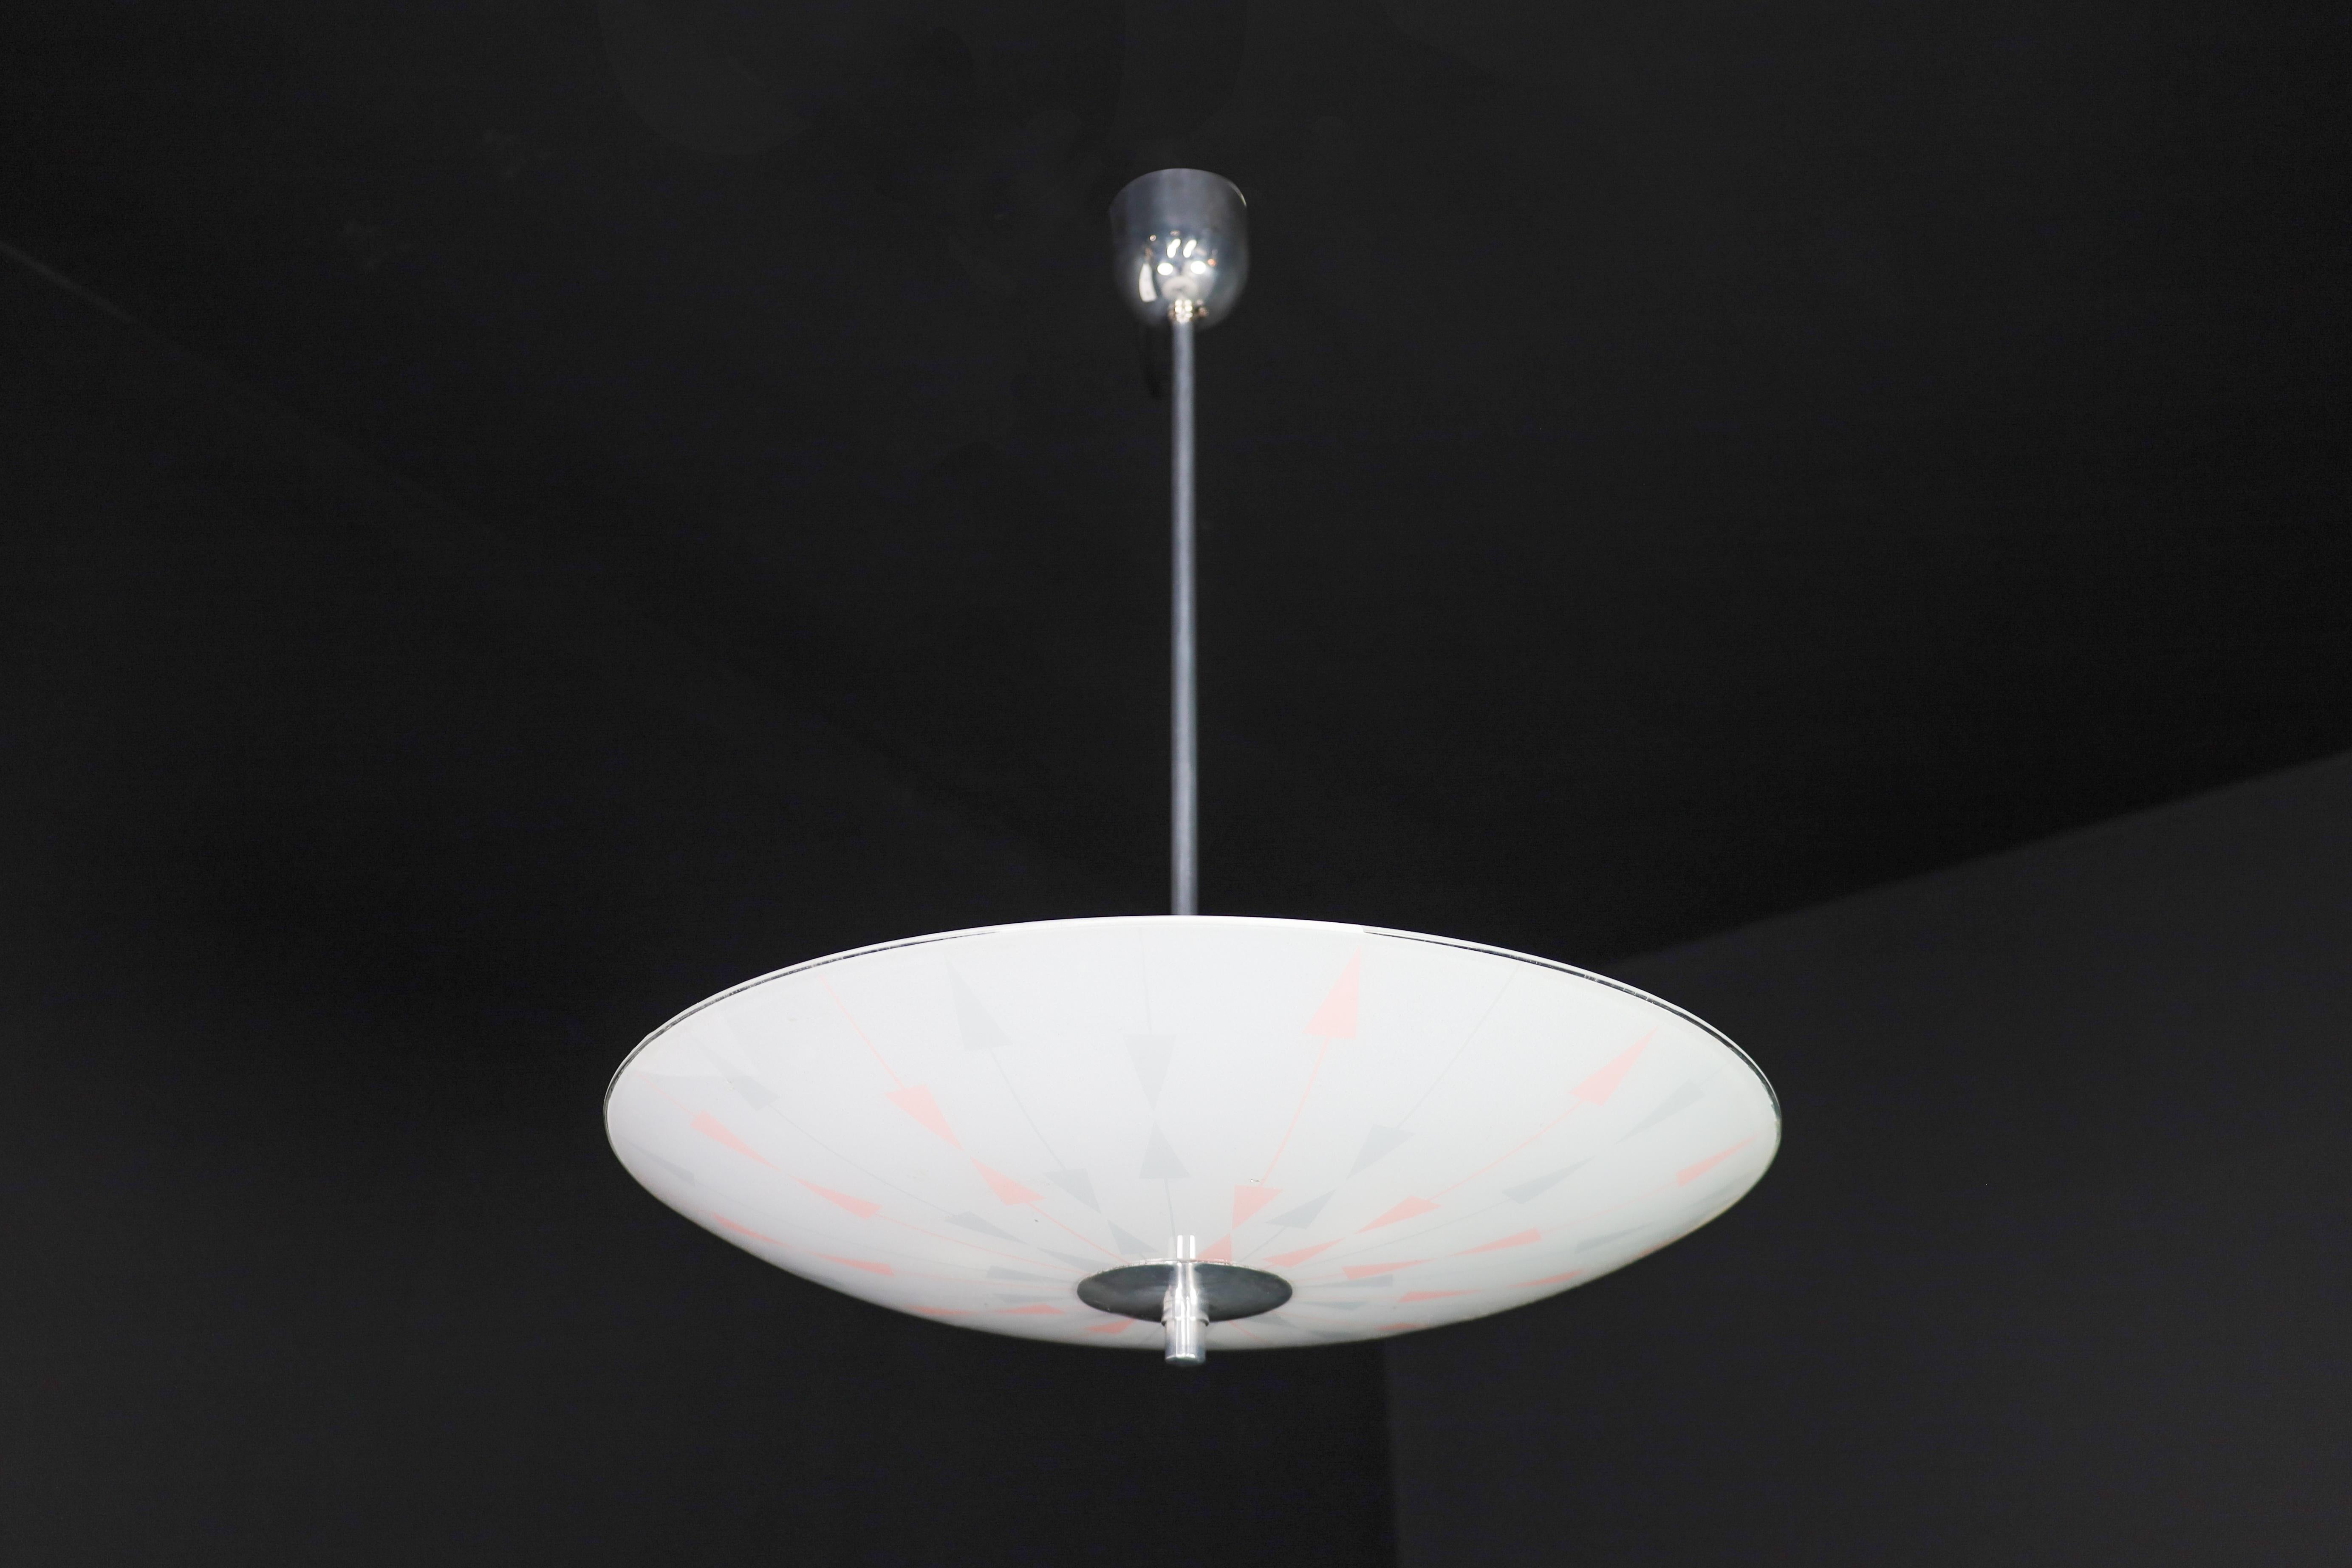 Mid-Century Glass Hanging Pendant Lamp Brussels World Expo 1958 (5116)

This pendant lamp is a magnificent piece of mid-century graphics and design that was showcased at the Czechoslovakia Pavilion during the Brussels World Fair in 1958. The shade